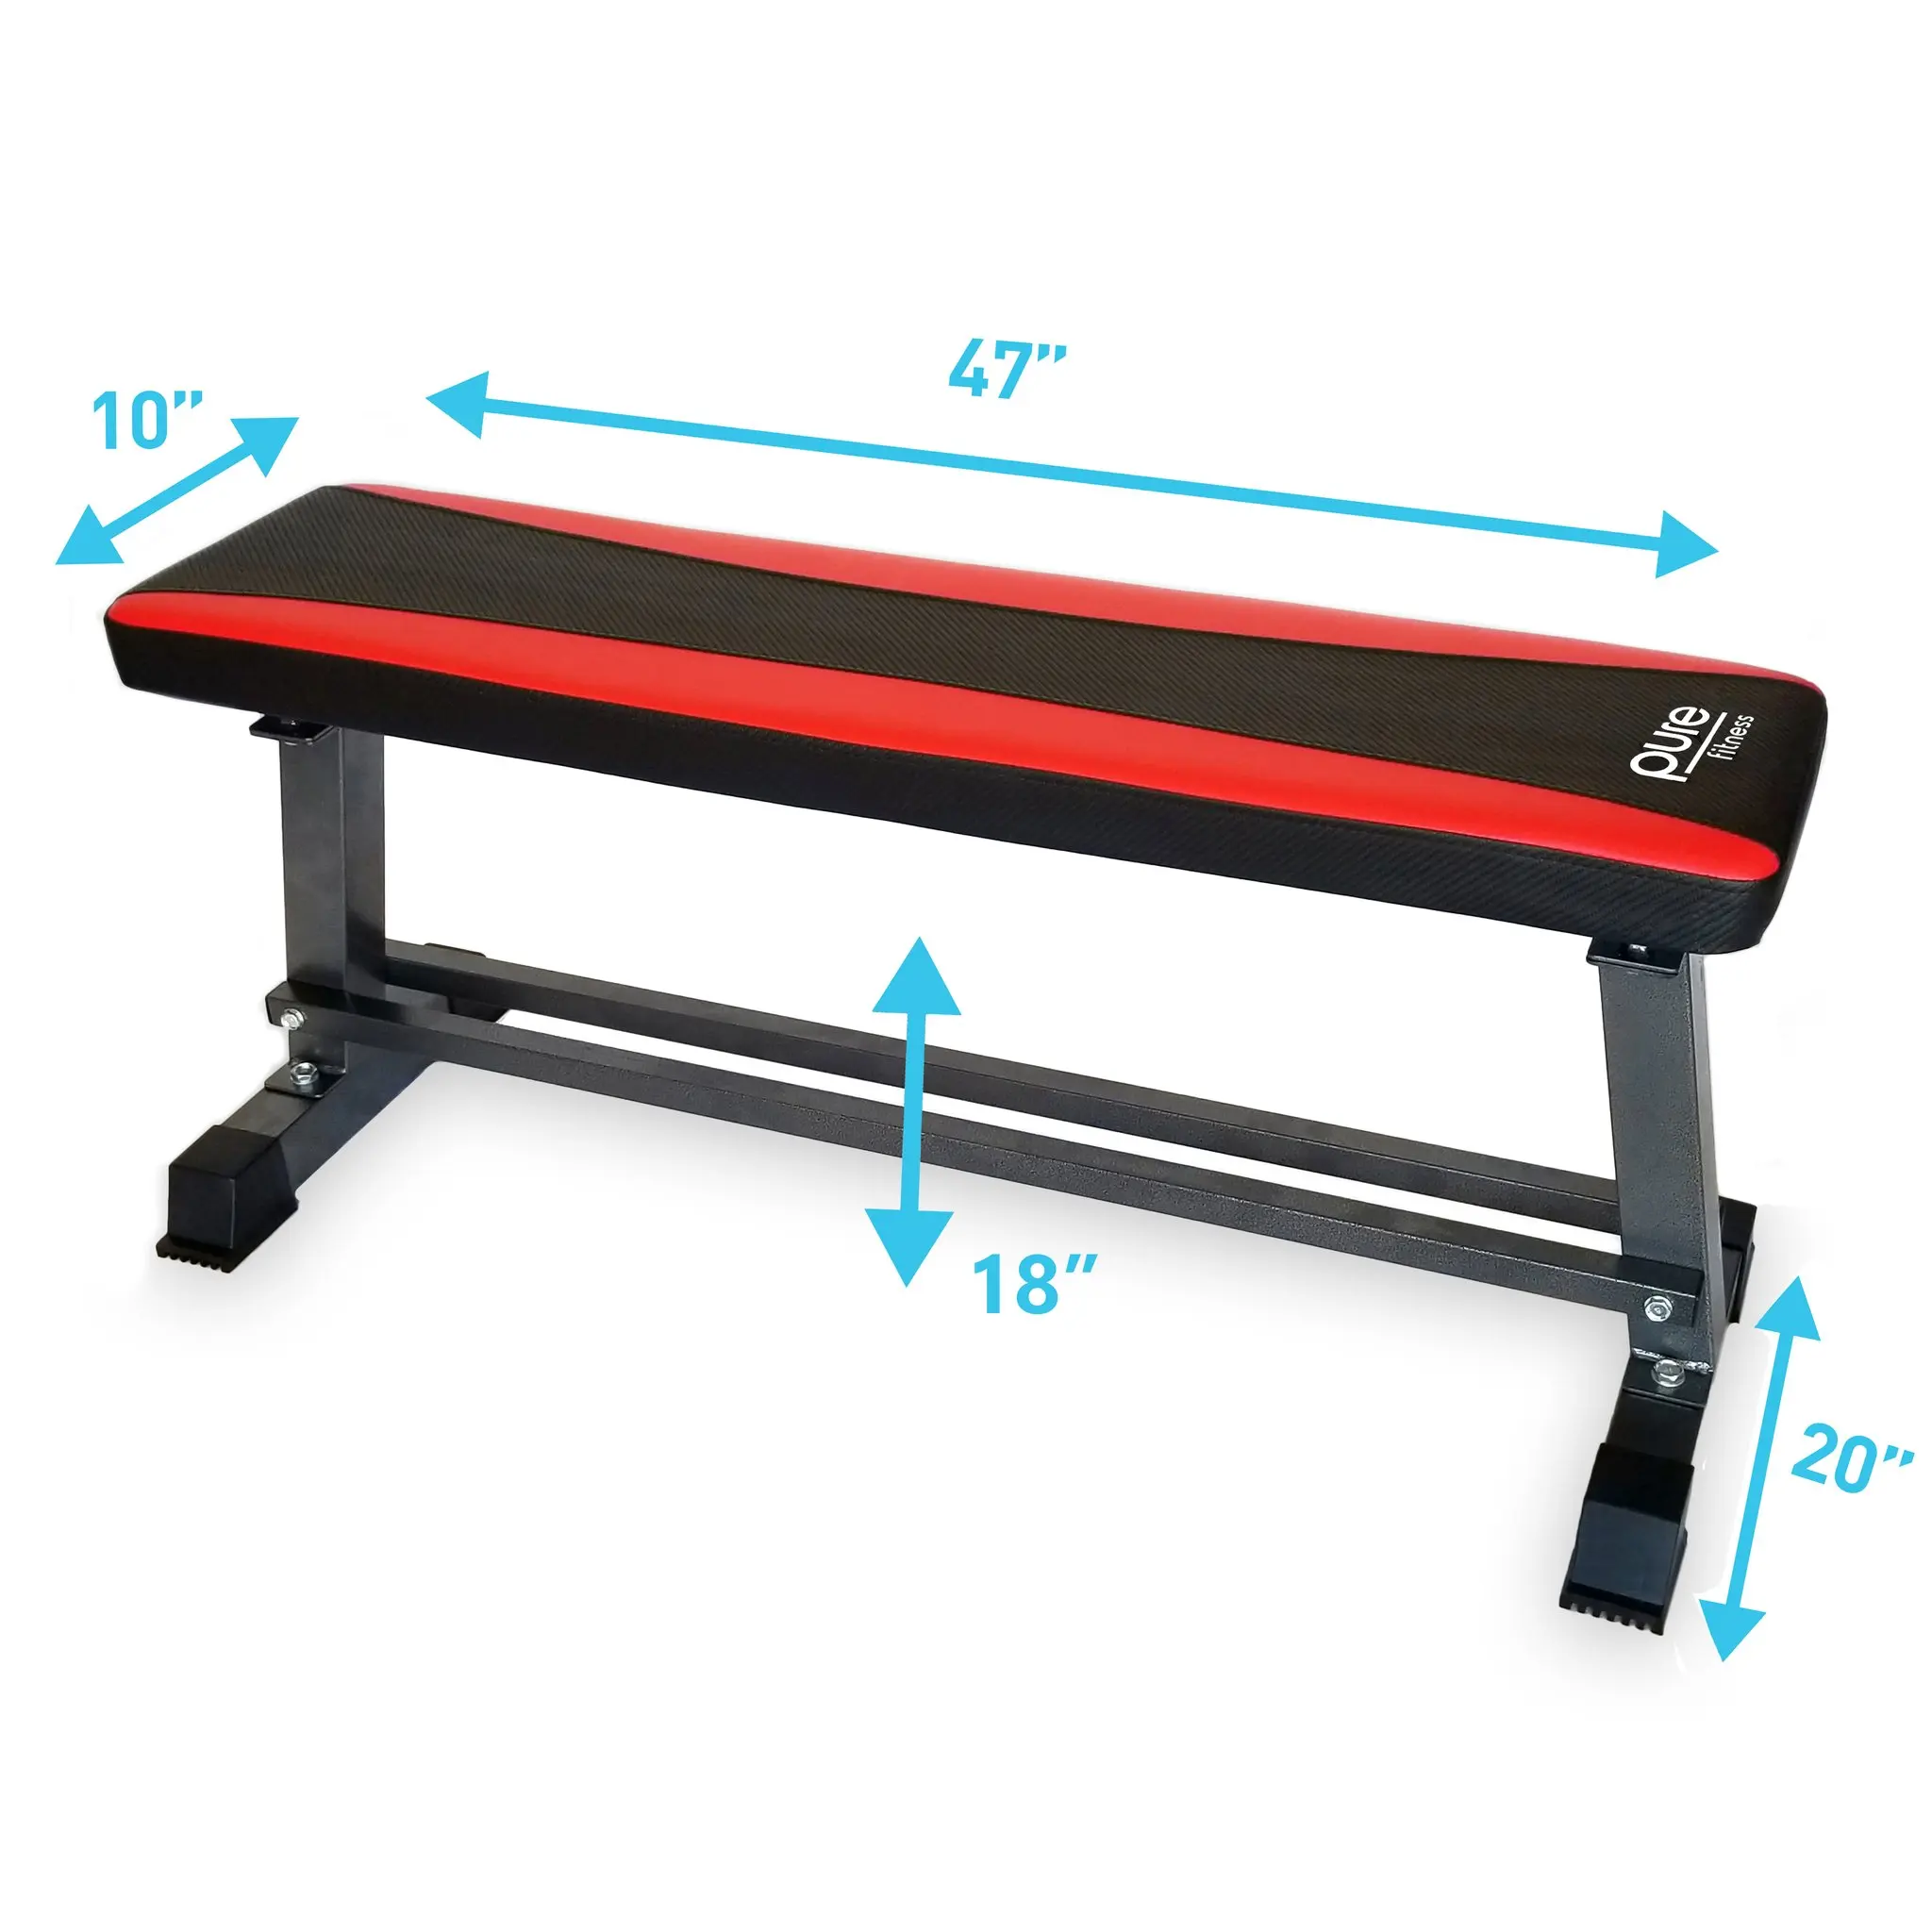 

2018 best sale cheap ningbo Sports Fitness Steel Frame Flat Weight Training Bench with Cross Bars weight bench, Customized color